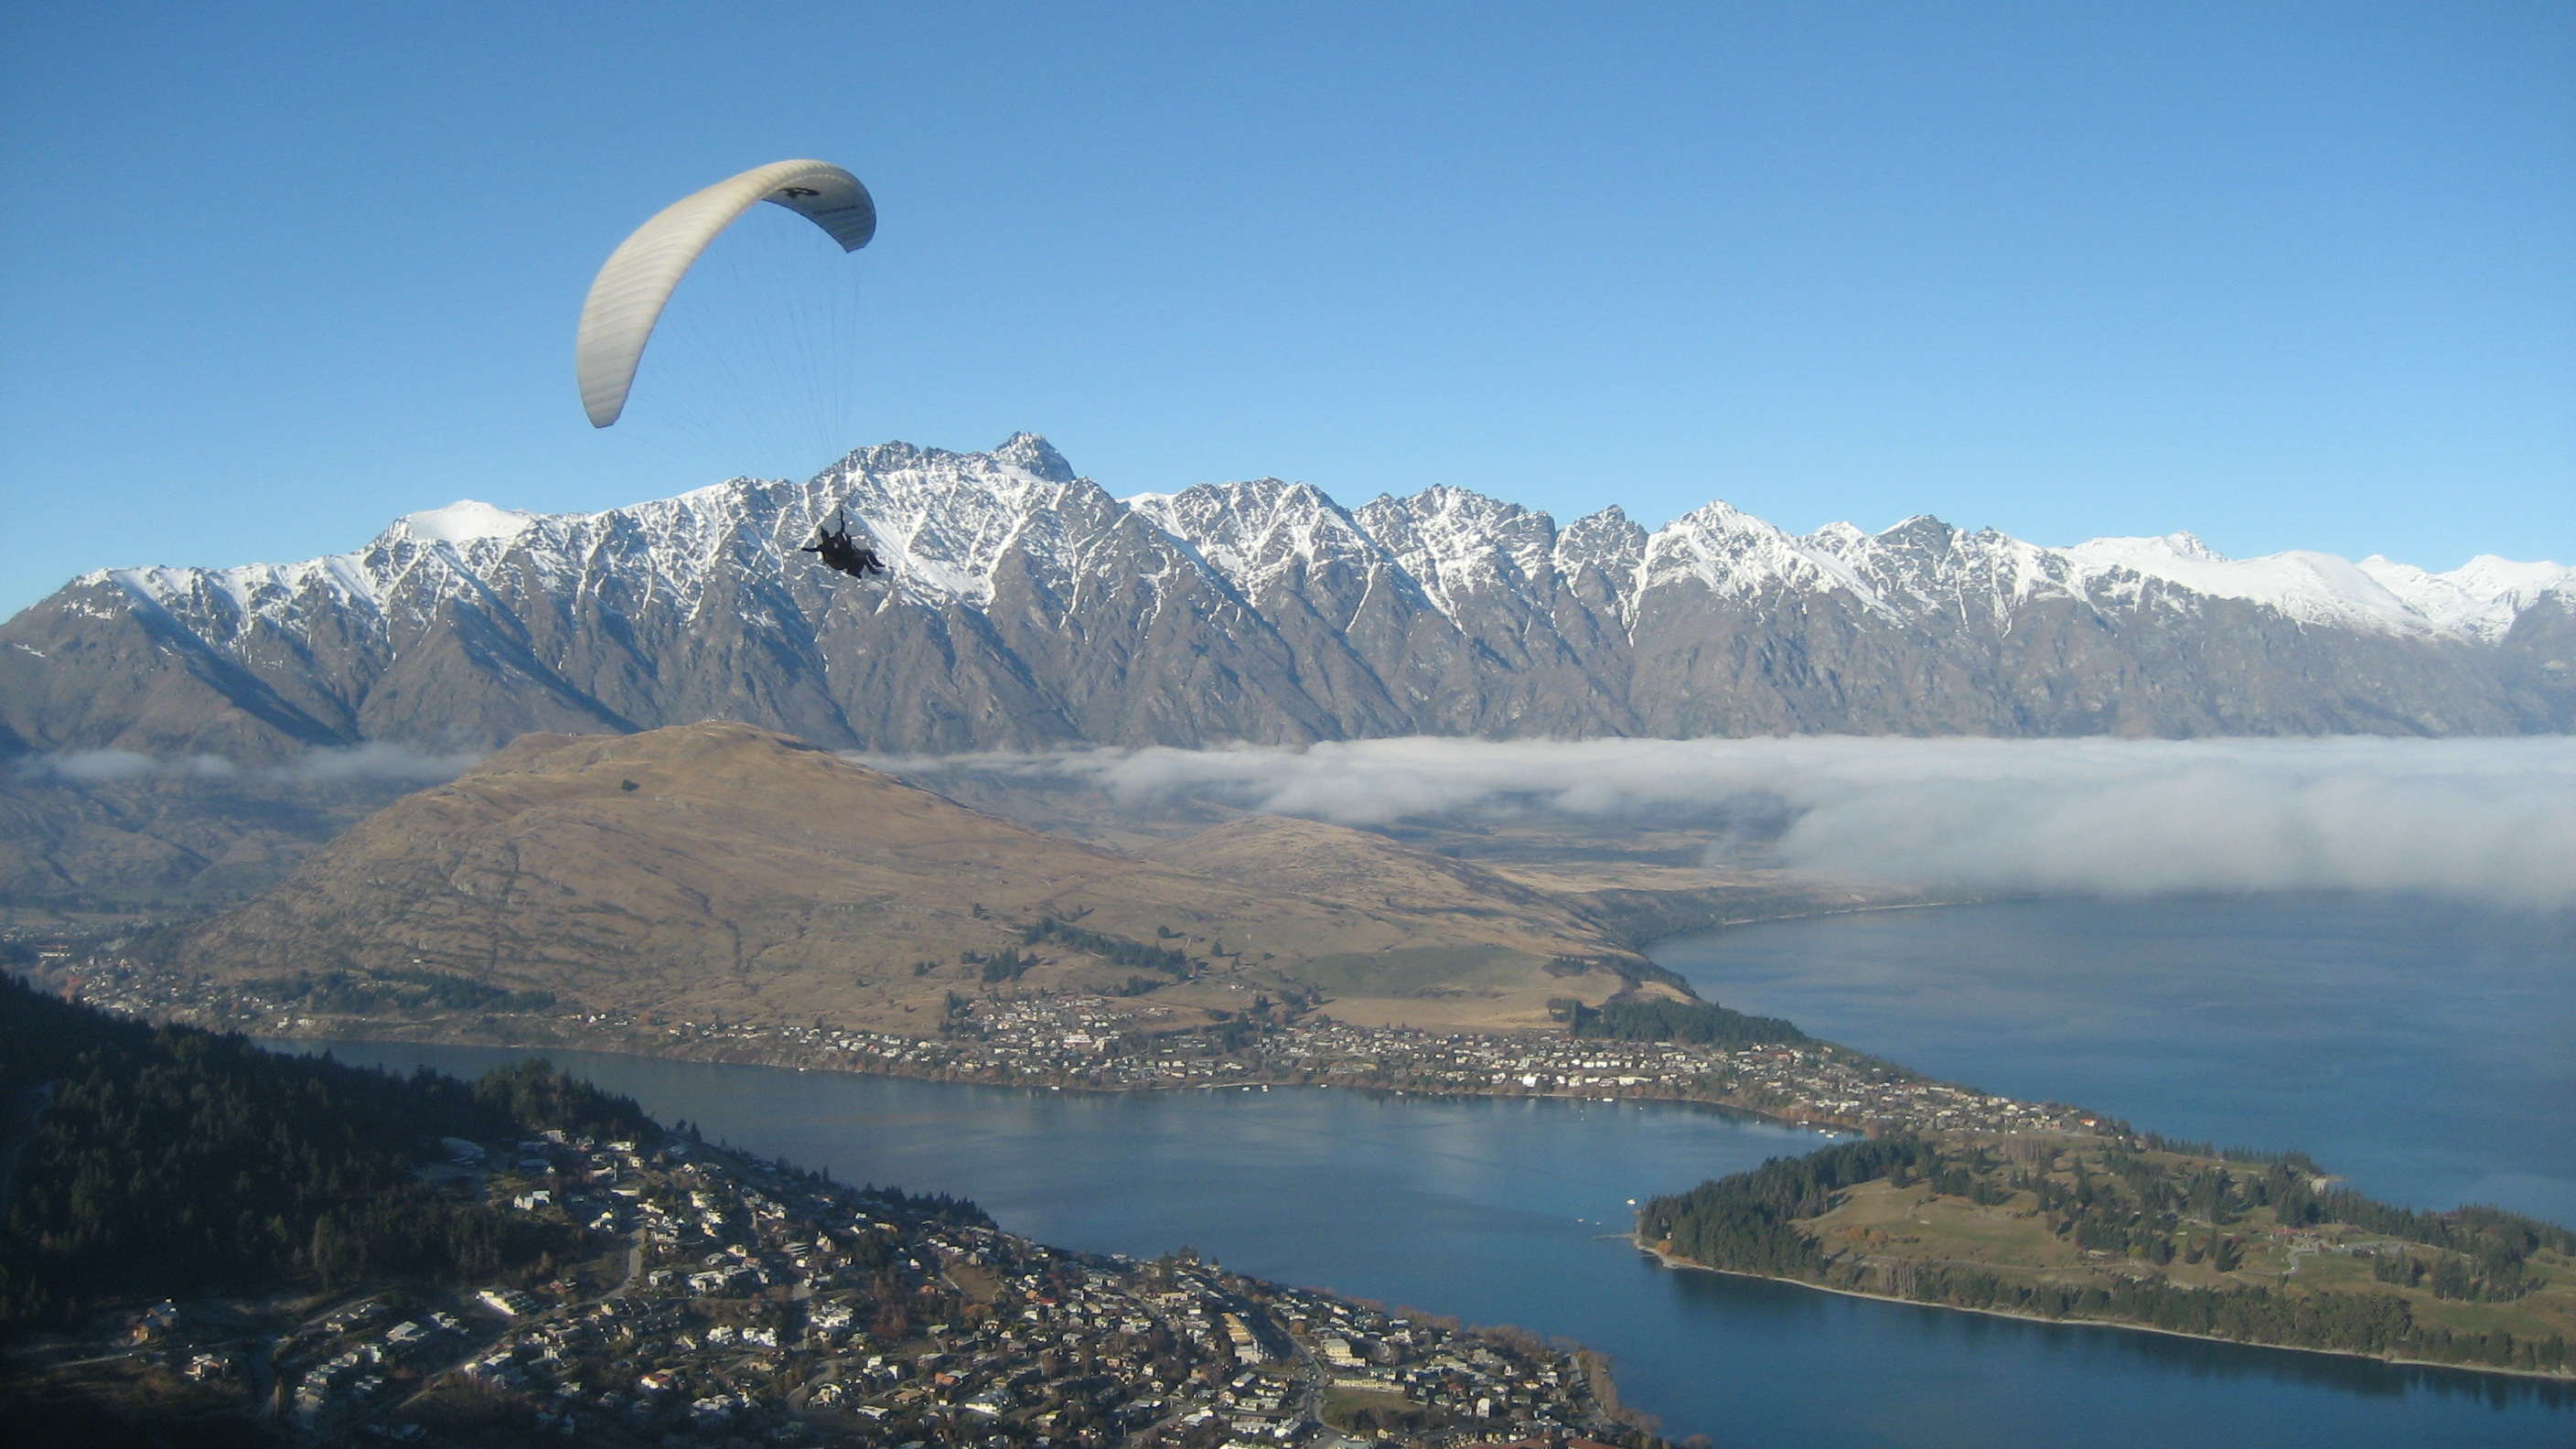 The Remarkables range (and the adventurer; I'm very proud of this pic!)